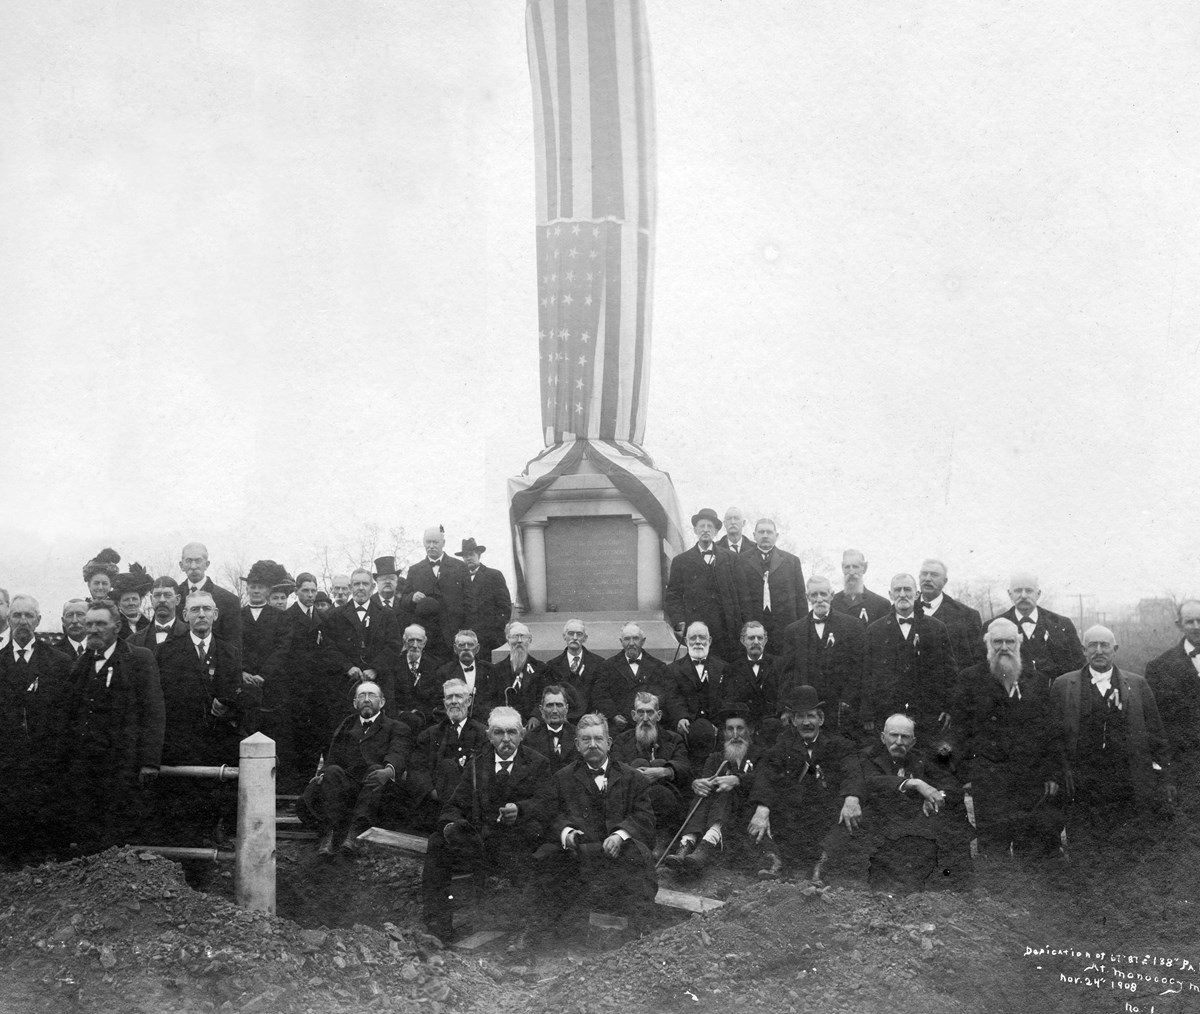 A group of elderly Civil War veterans sit in front of a tall monument shrouded in the American flag.